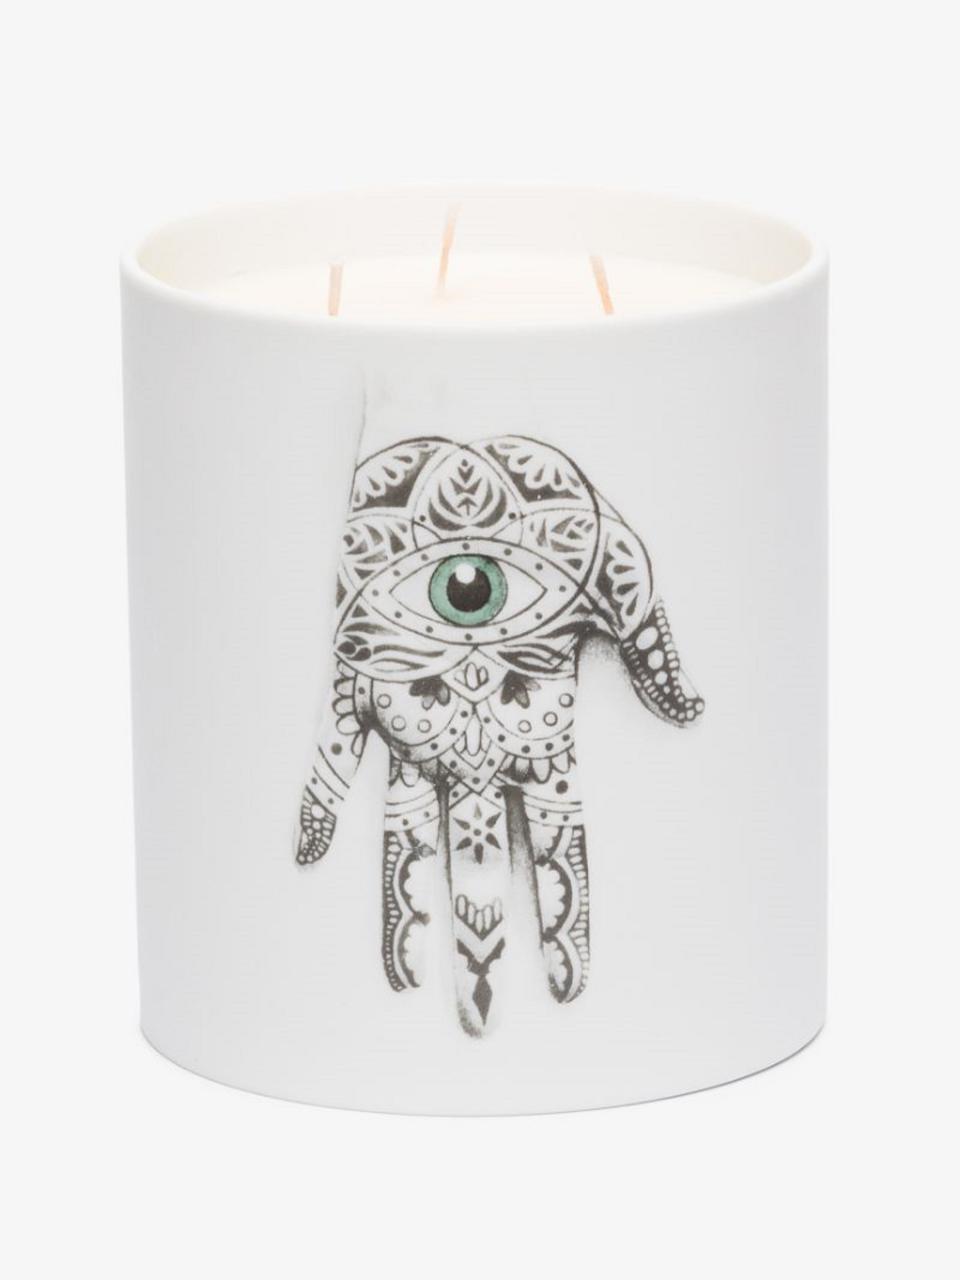 28 Unisex Valentine's Day Gifts: L'Objet White Mamounia No.28 candle